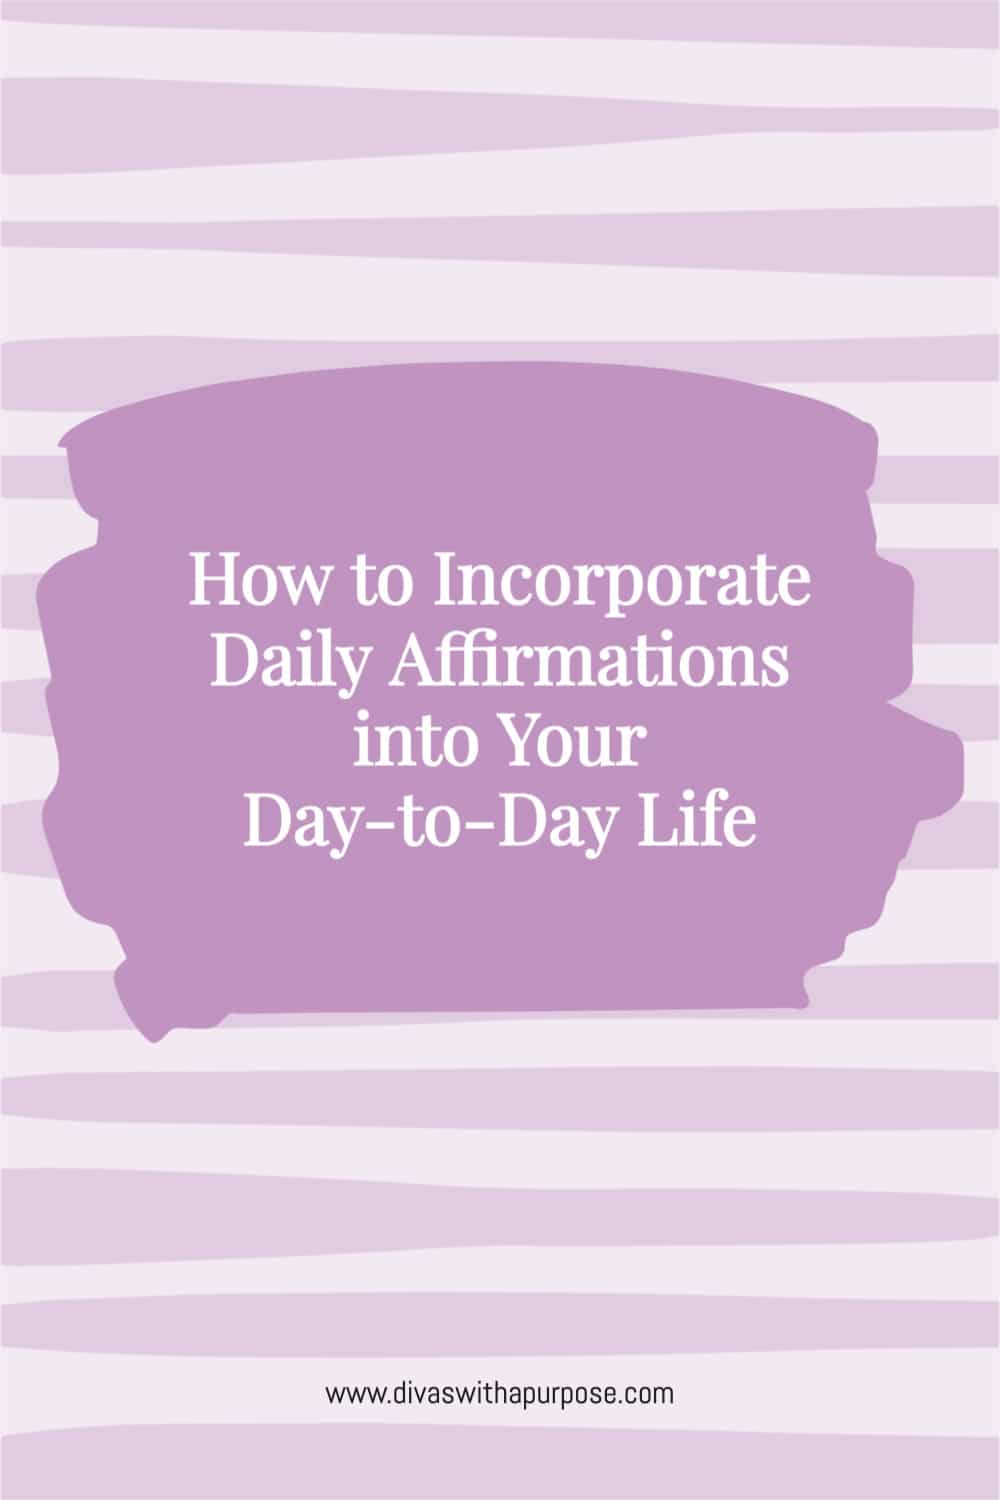 When you incorporate daily affirmations into your life they can play a big part in your success. Here are 20 ways to do just that.